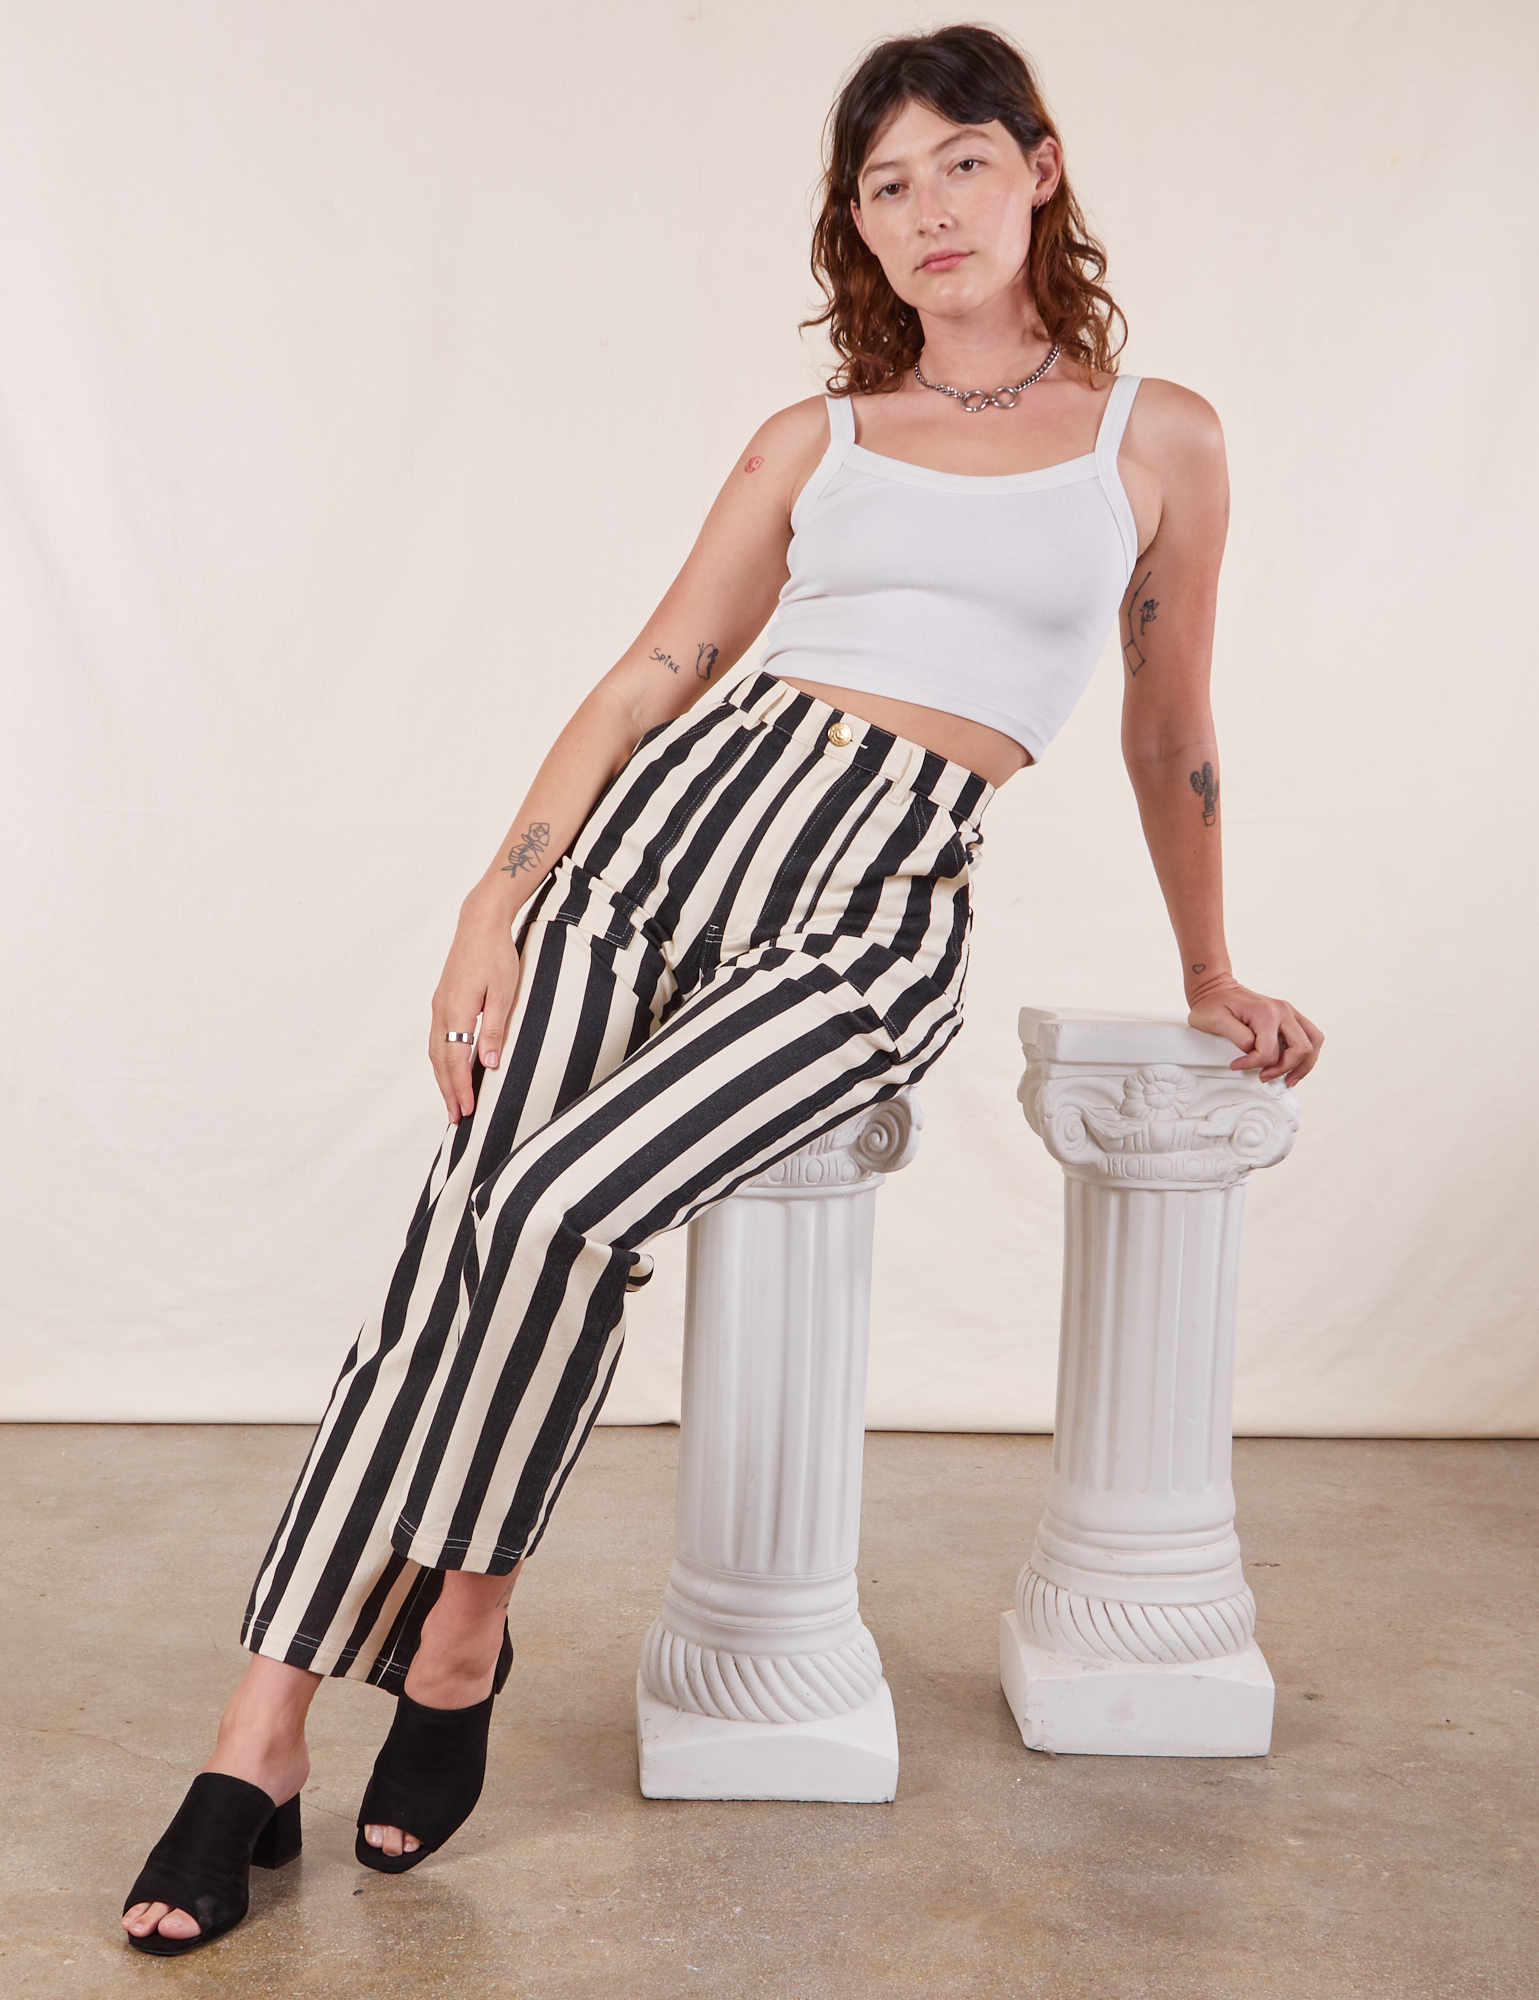 Alex is wearing Black Striped Work Pants in White and vintage off-white Cropped Cami